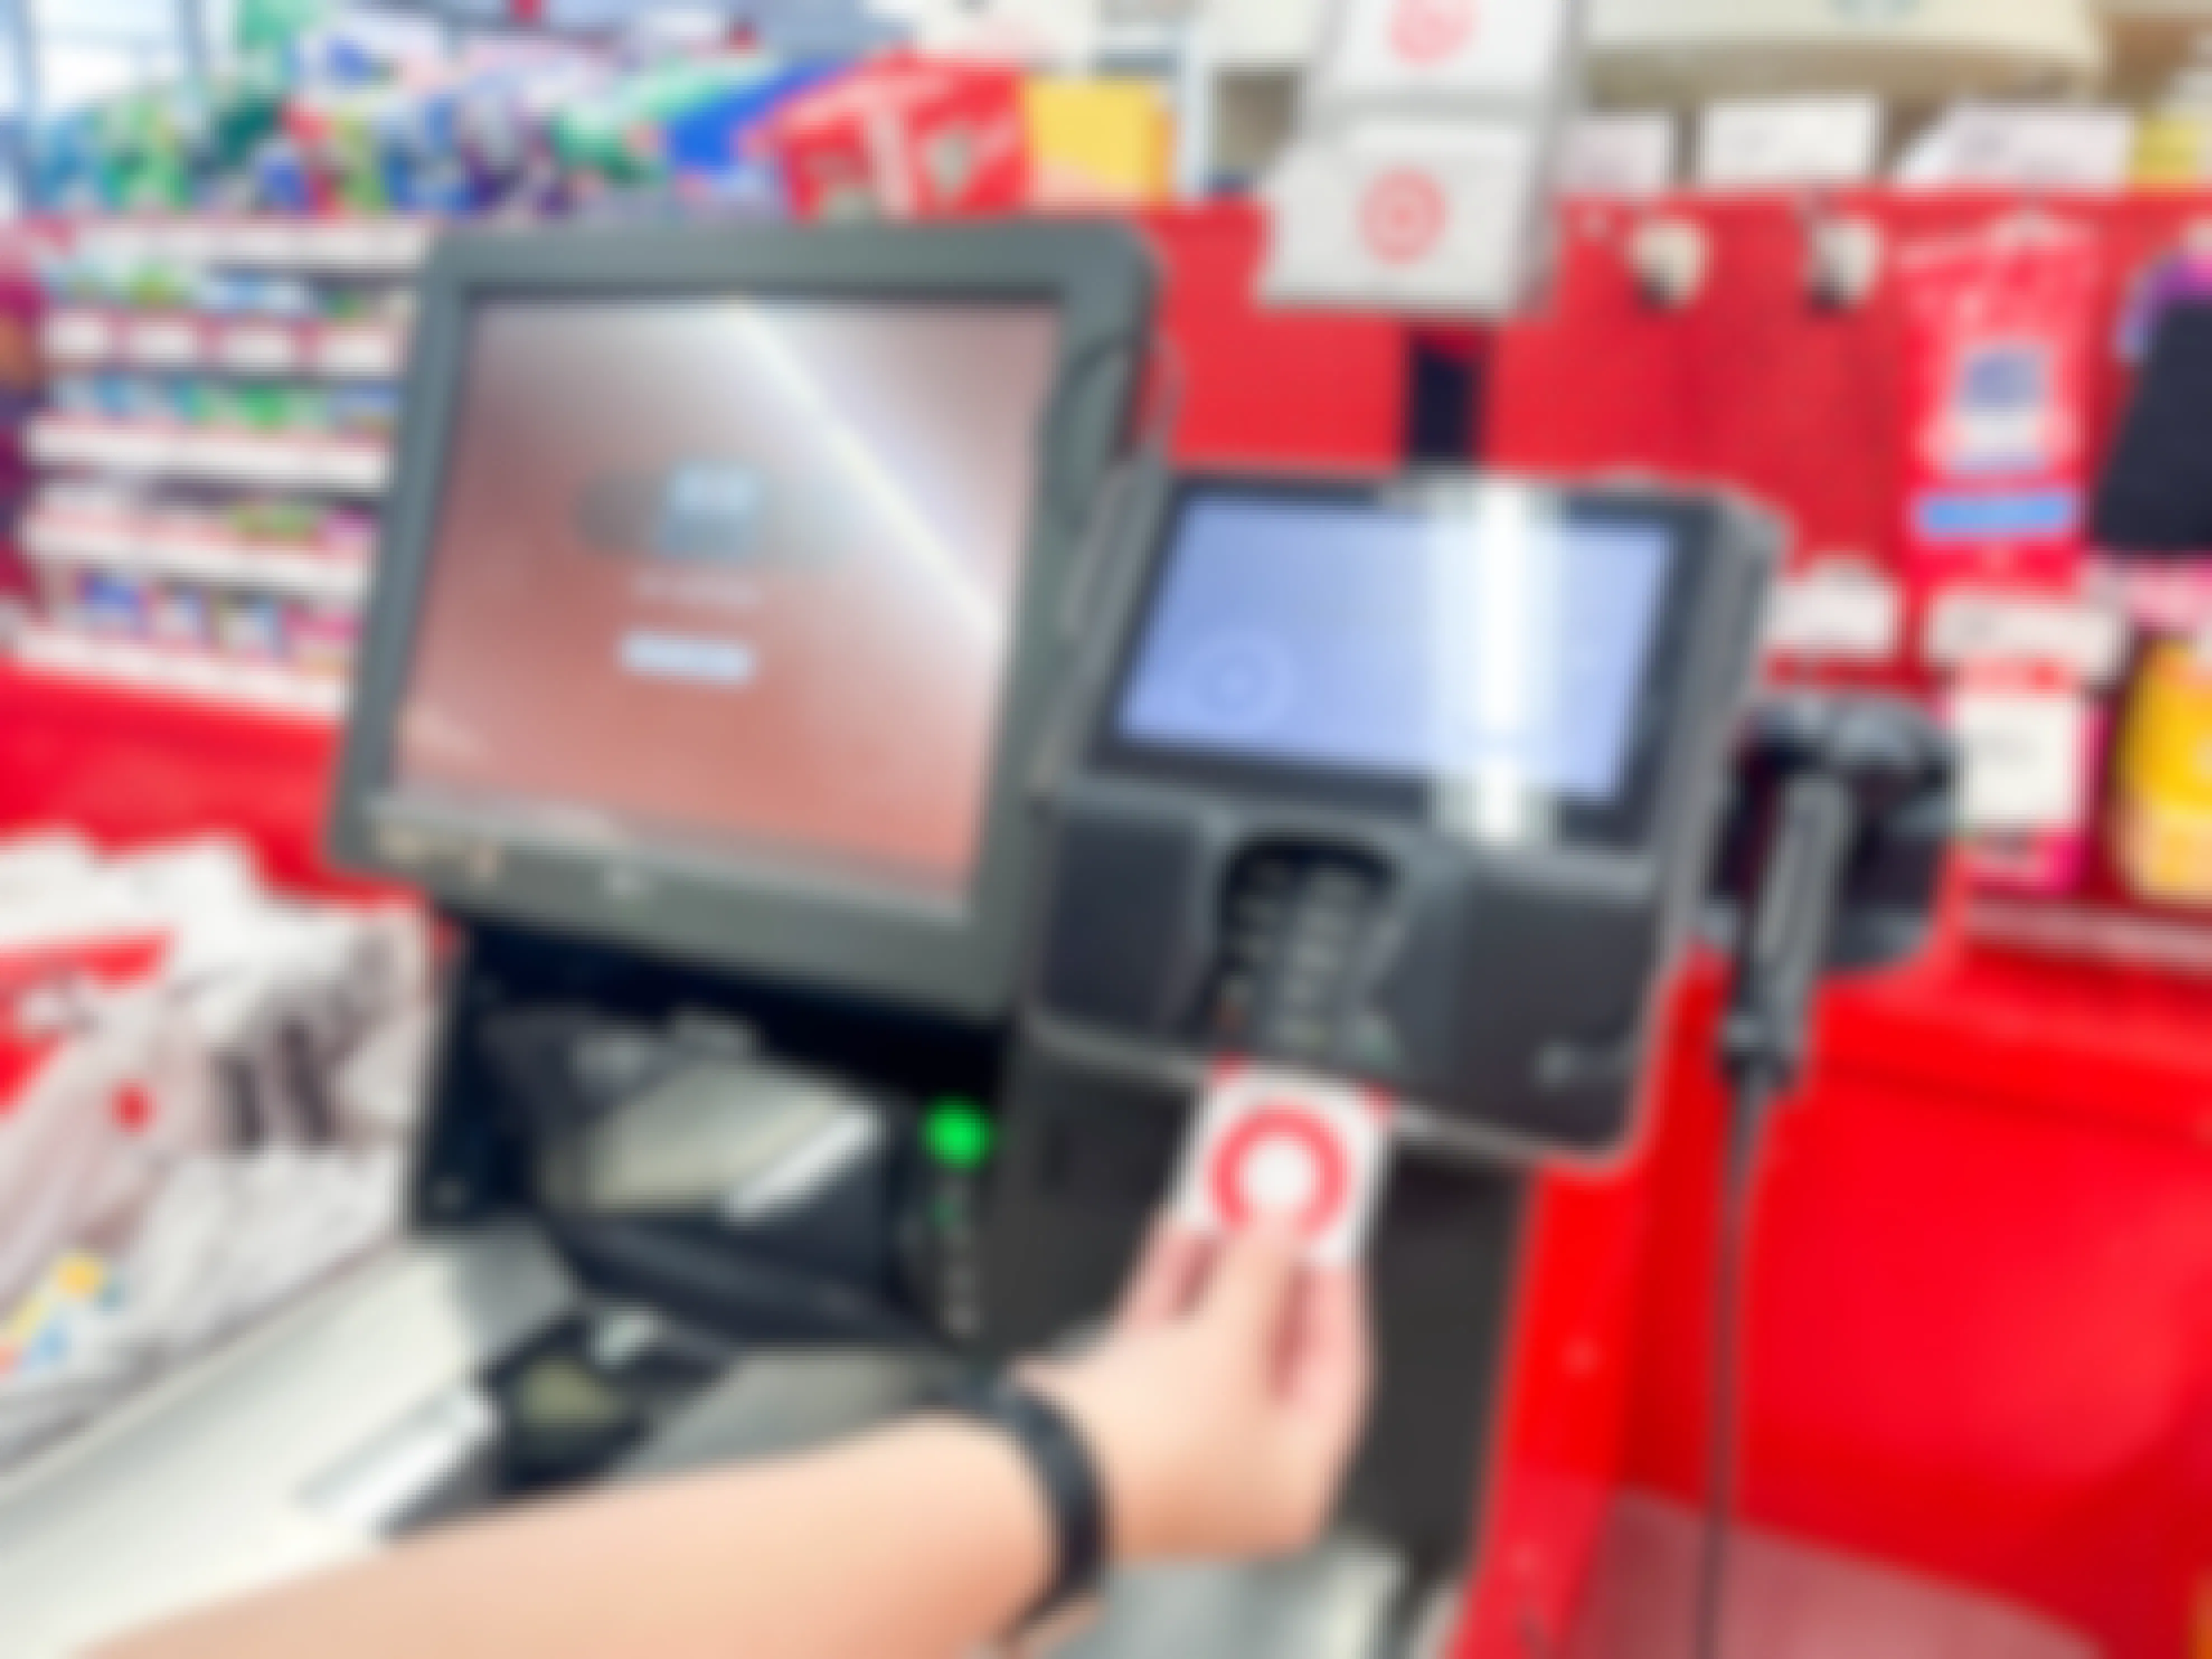 a person using a target red card at self checkout at target